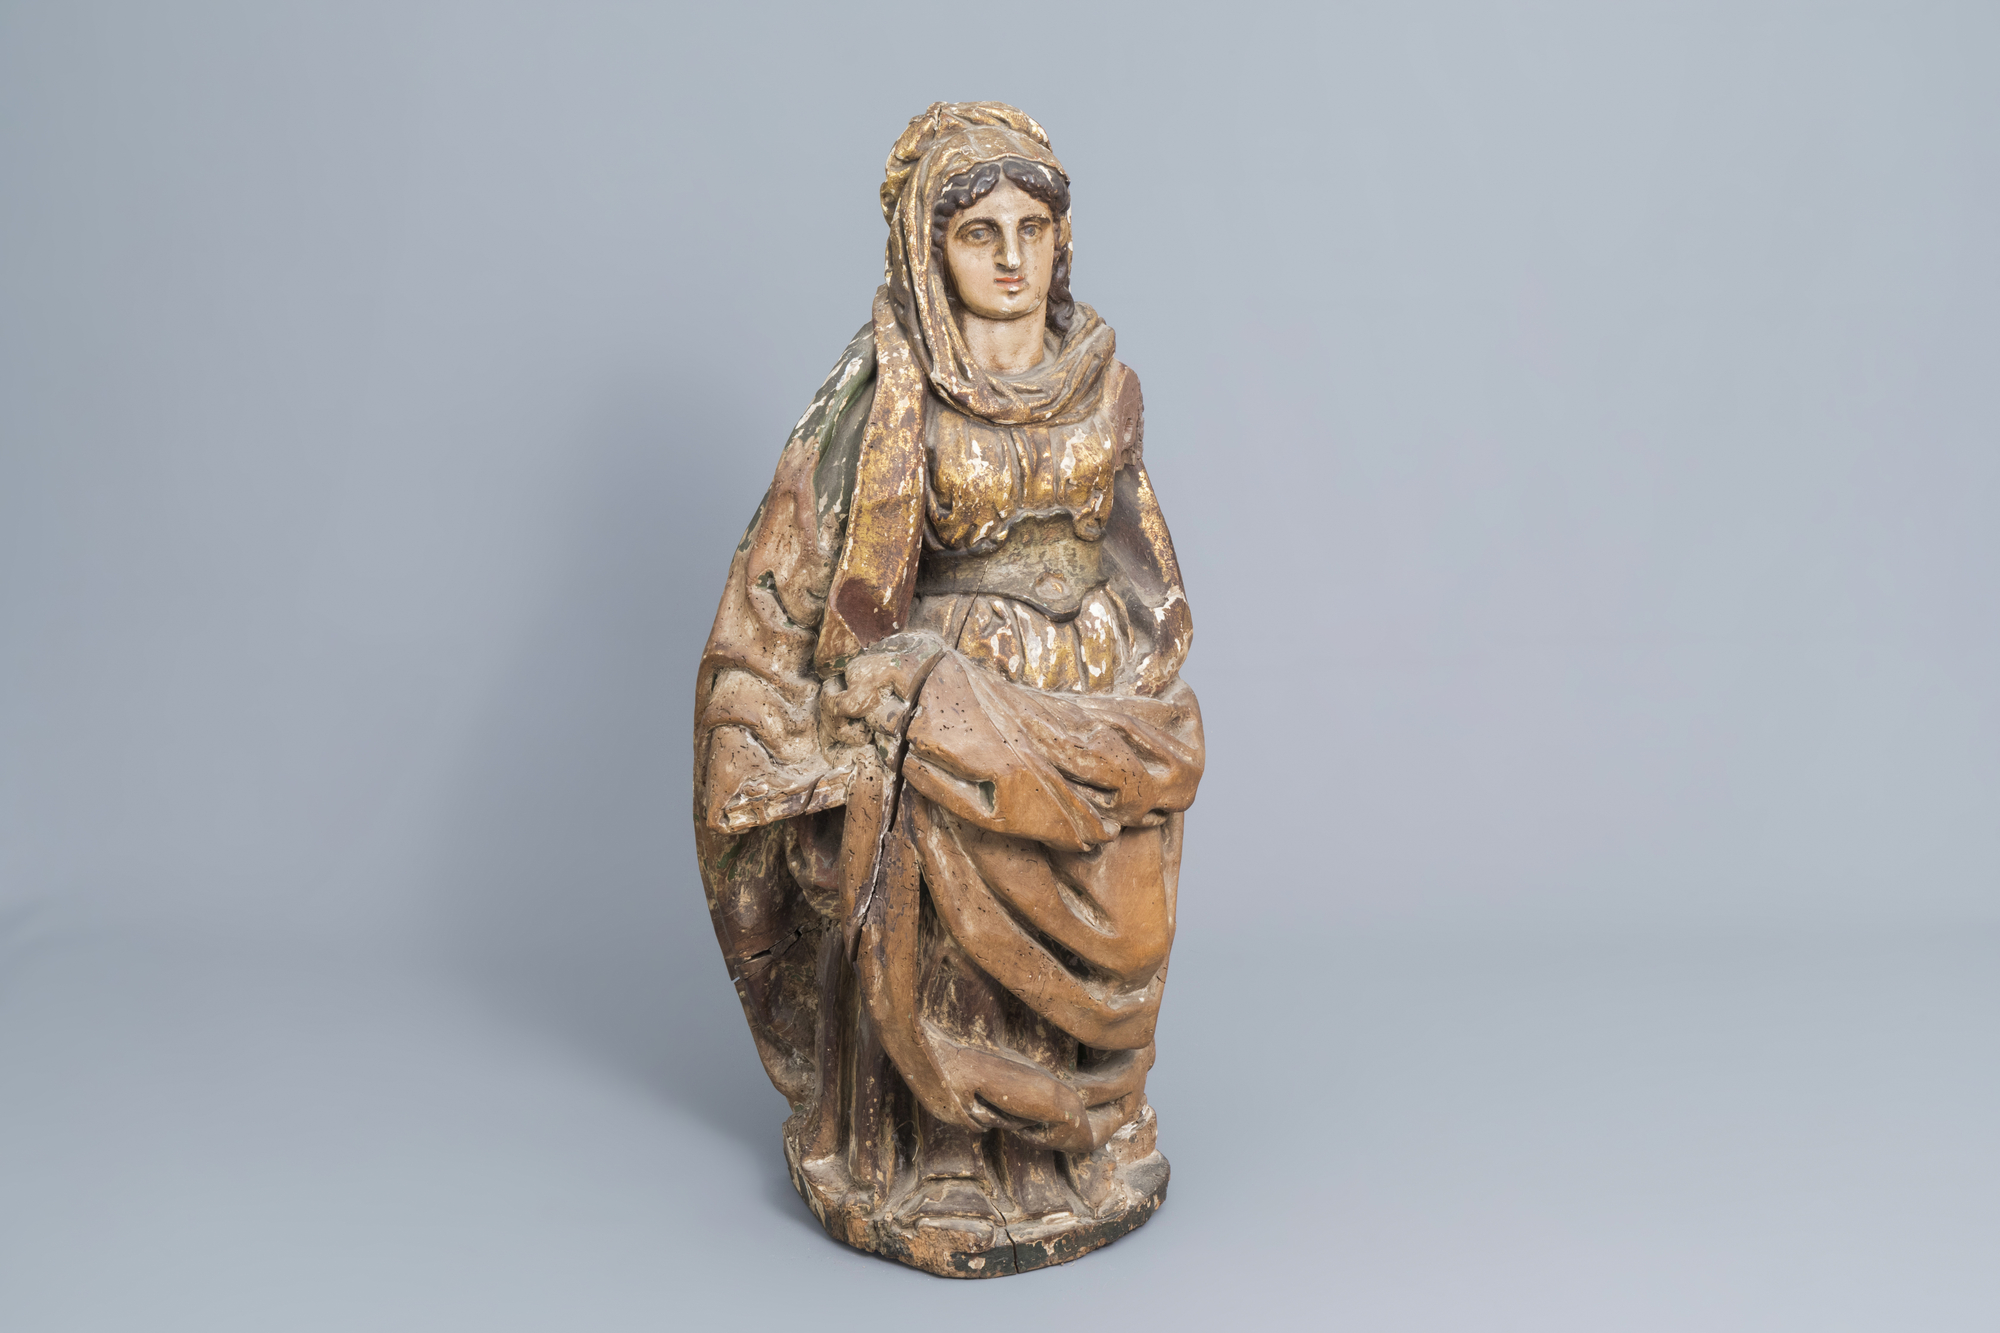 A Southern European carved, gilt and polychrome painted wooden figure, possibly Saint Barbara, 18th